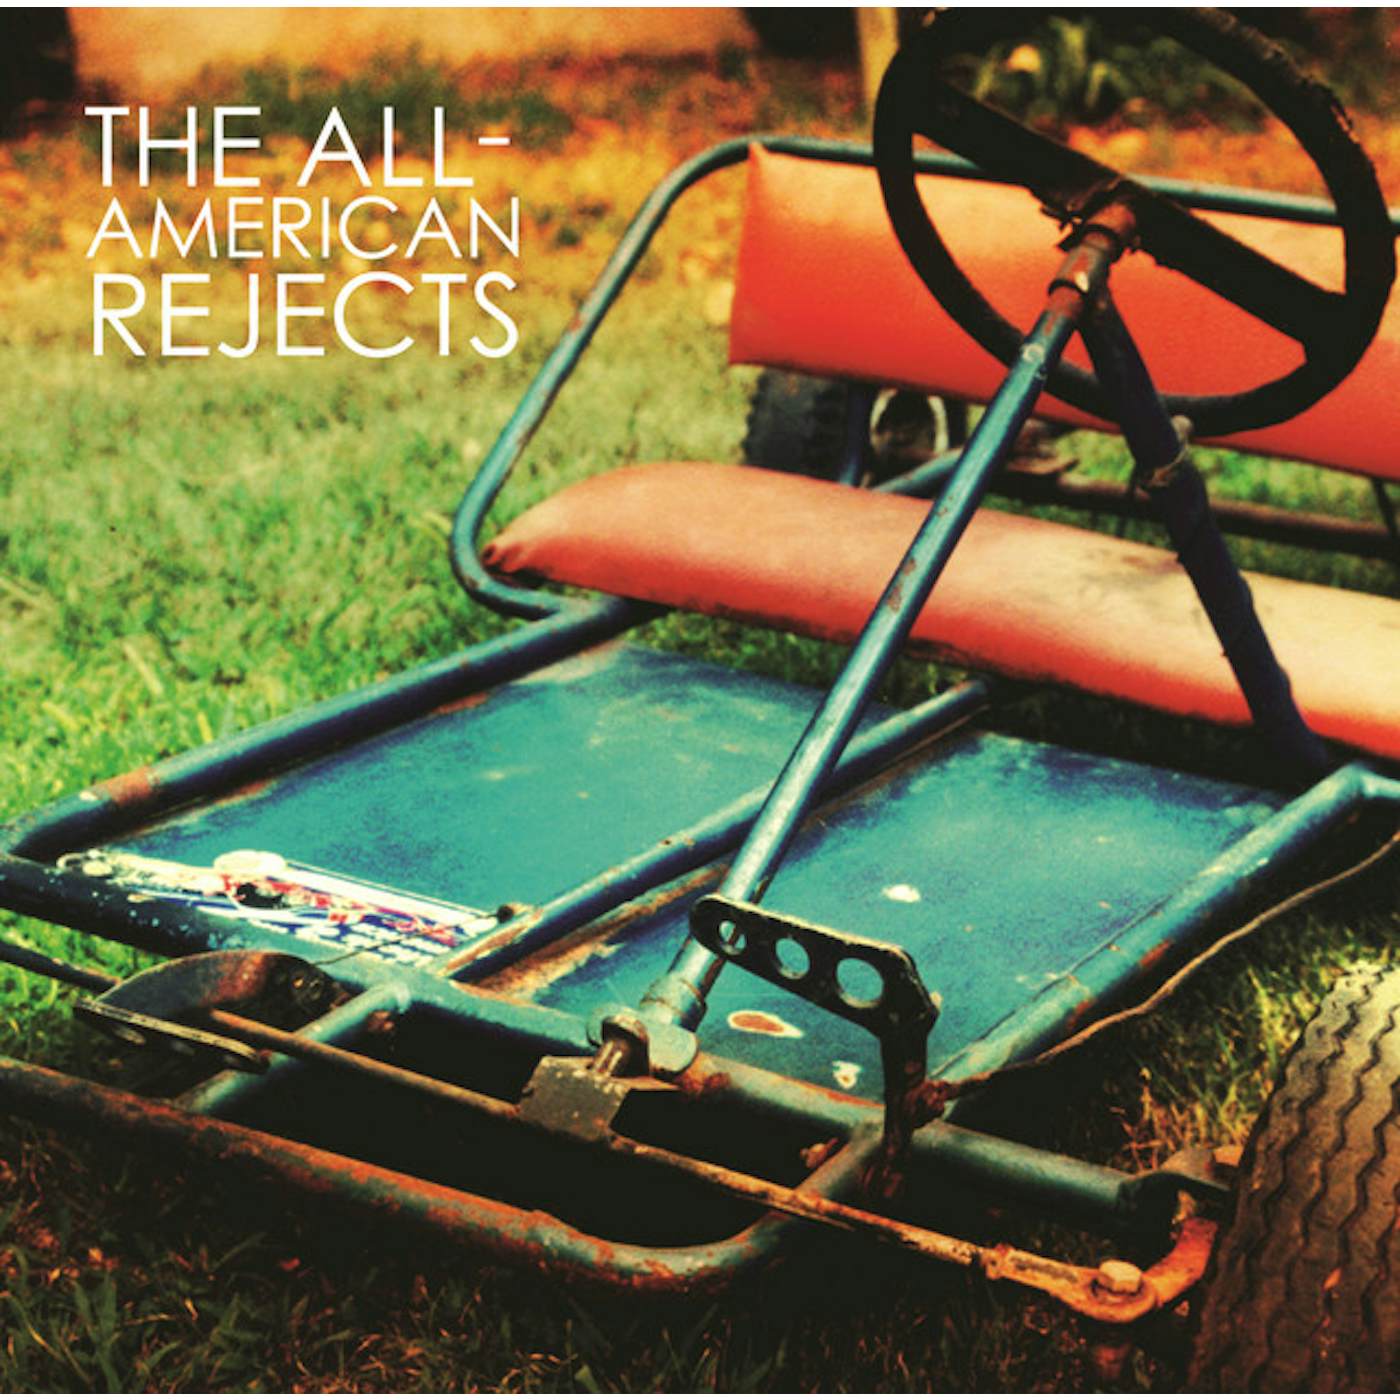 The All-American Rejects Vinyl Record